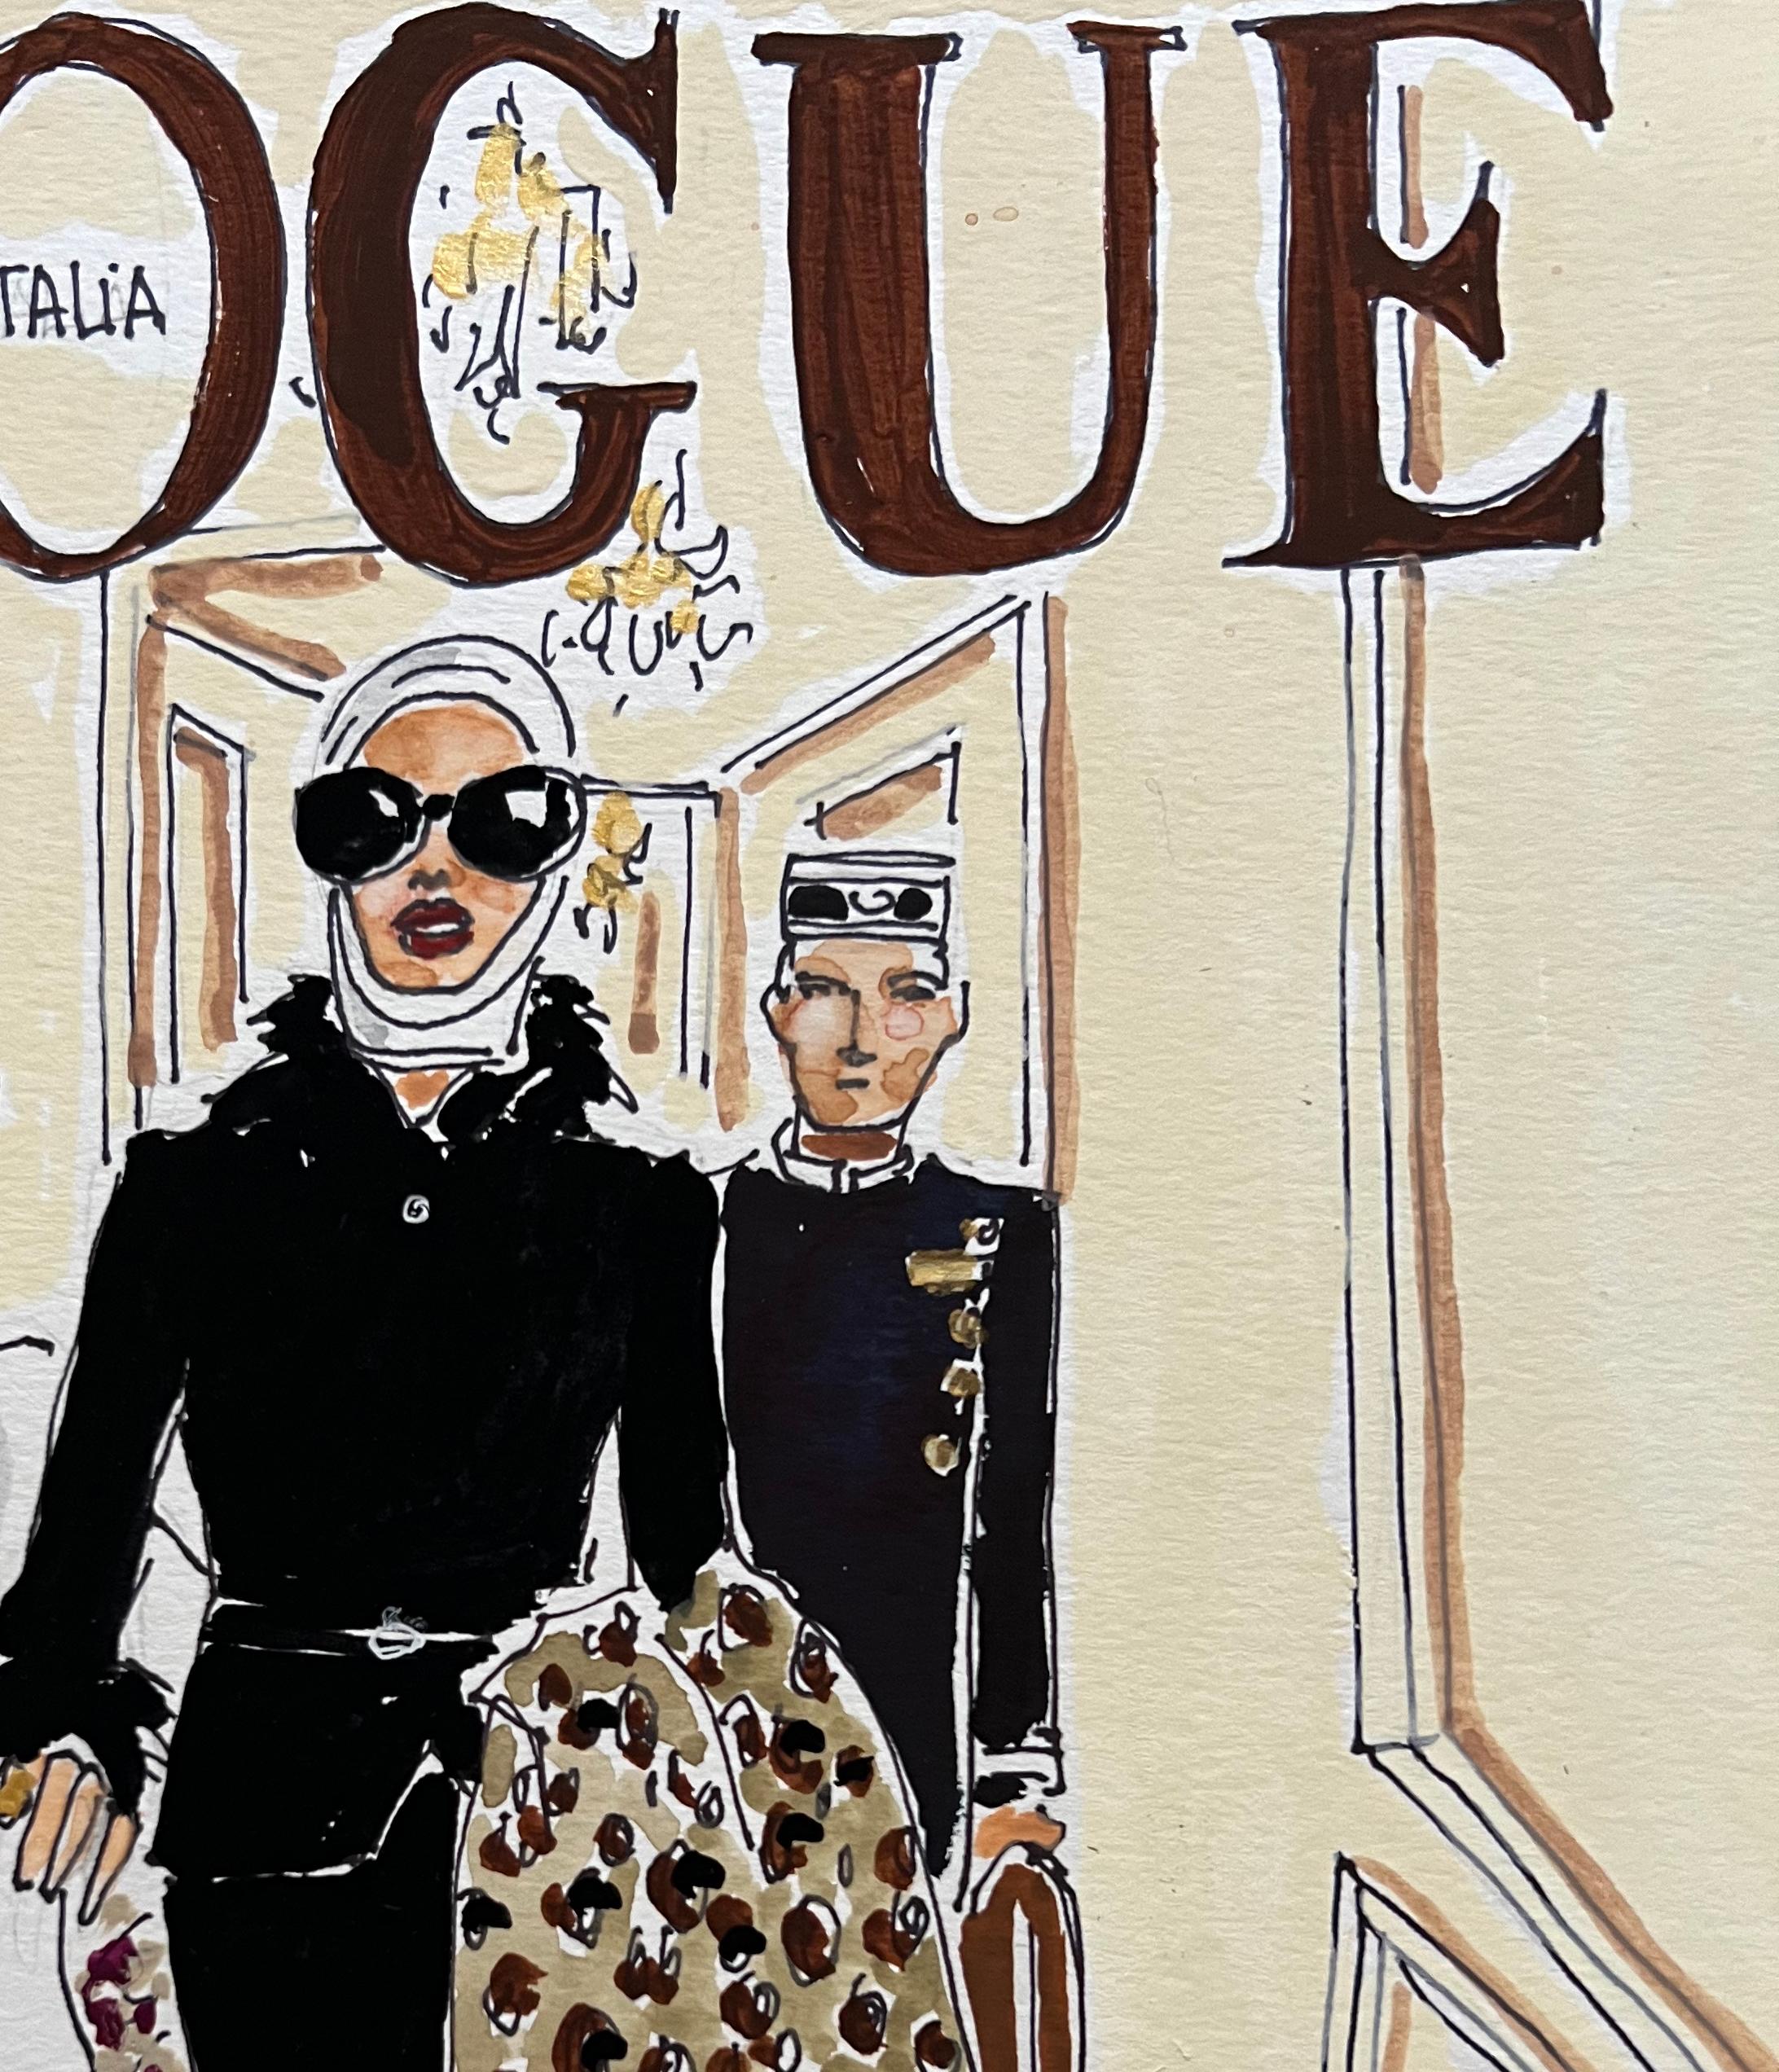 Linda Evangelista in Vogue Italia by Manuel Santelices 
Ink pen and watercolor on paper
Unframed
2022


Manuel Santelices explores the world of fashion, society, and pop culture through his illustrations. A Chilean artist and journalist living and